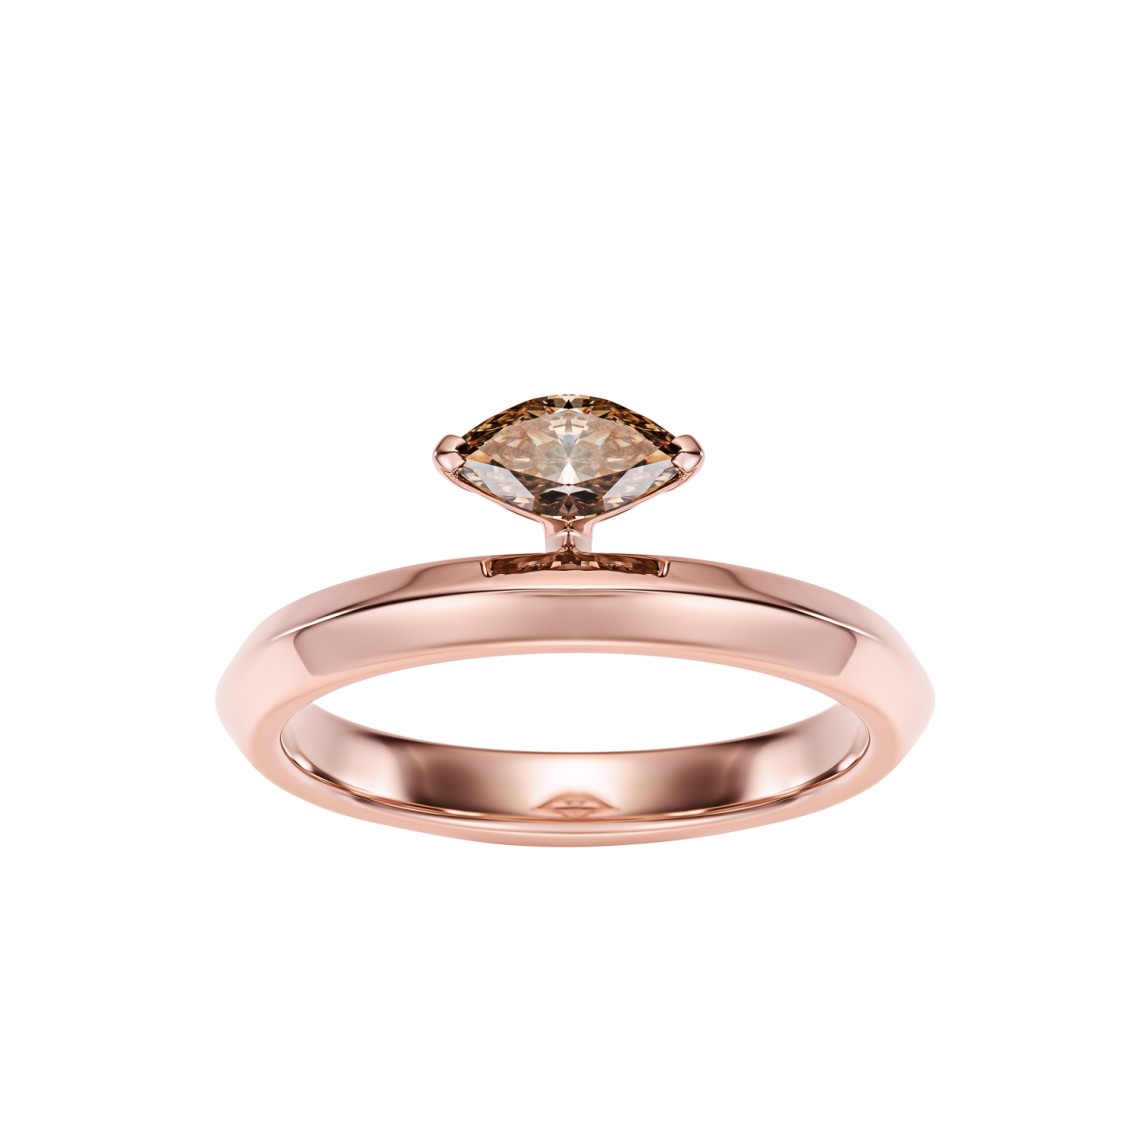 Fancy Brown Marquise-Cut Diamond Ring